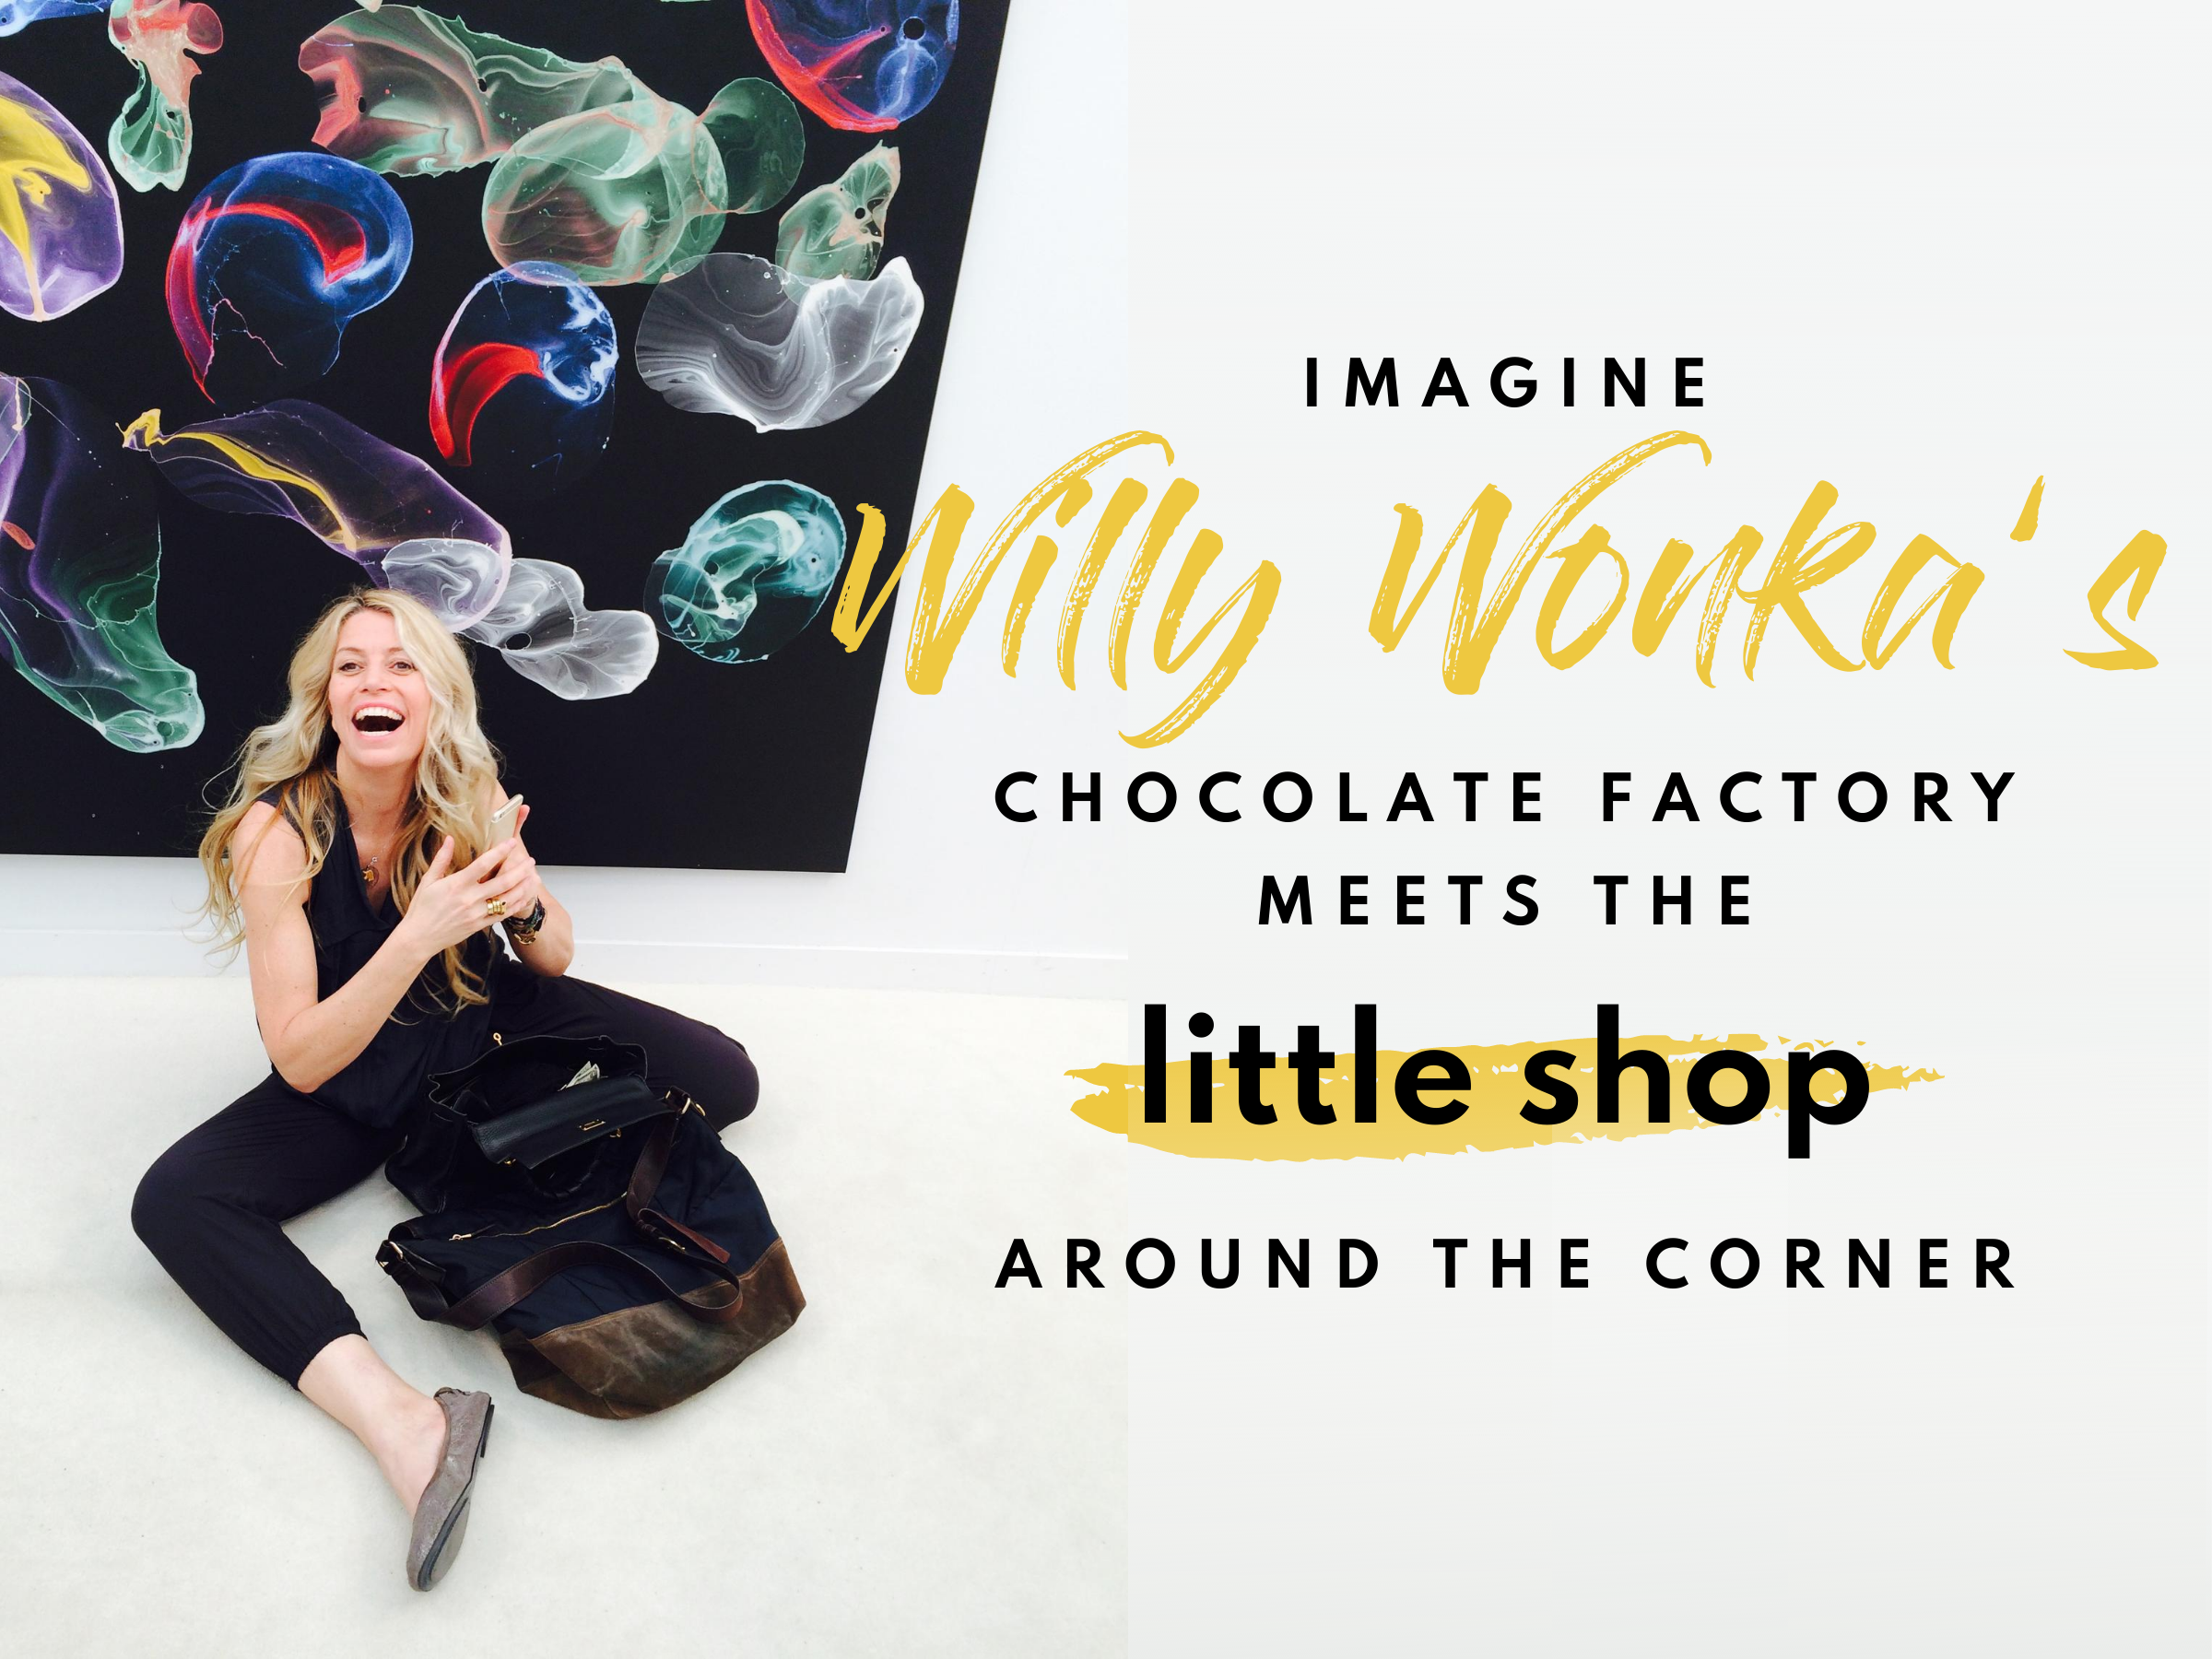 Imagine Willy Wonka's Chocolate Factory meets the little shop around the corner